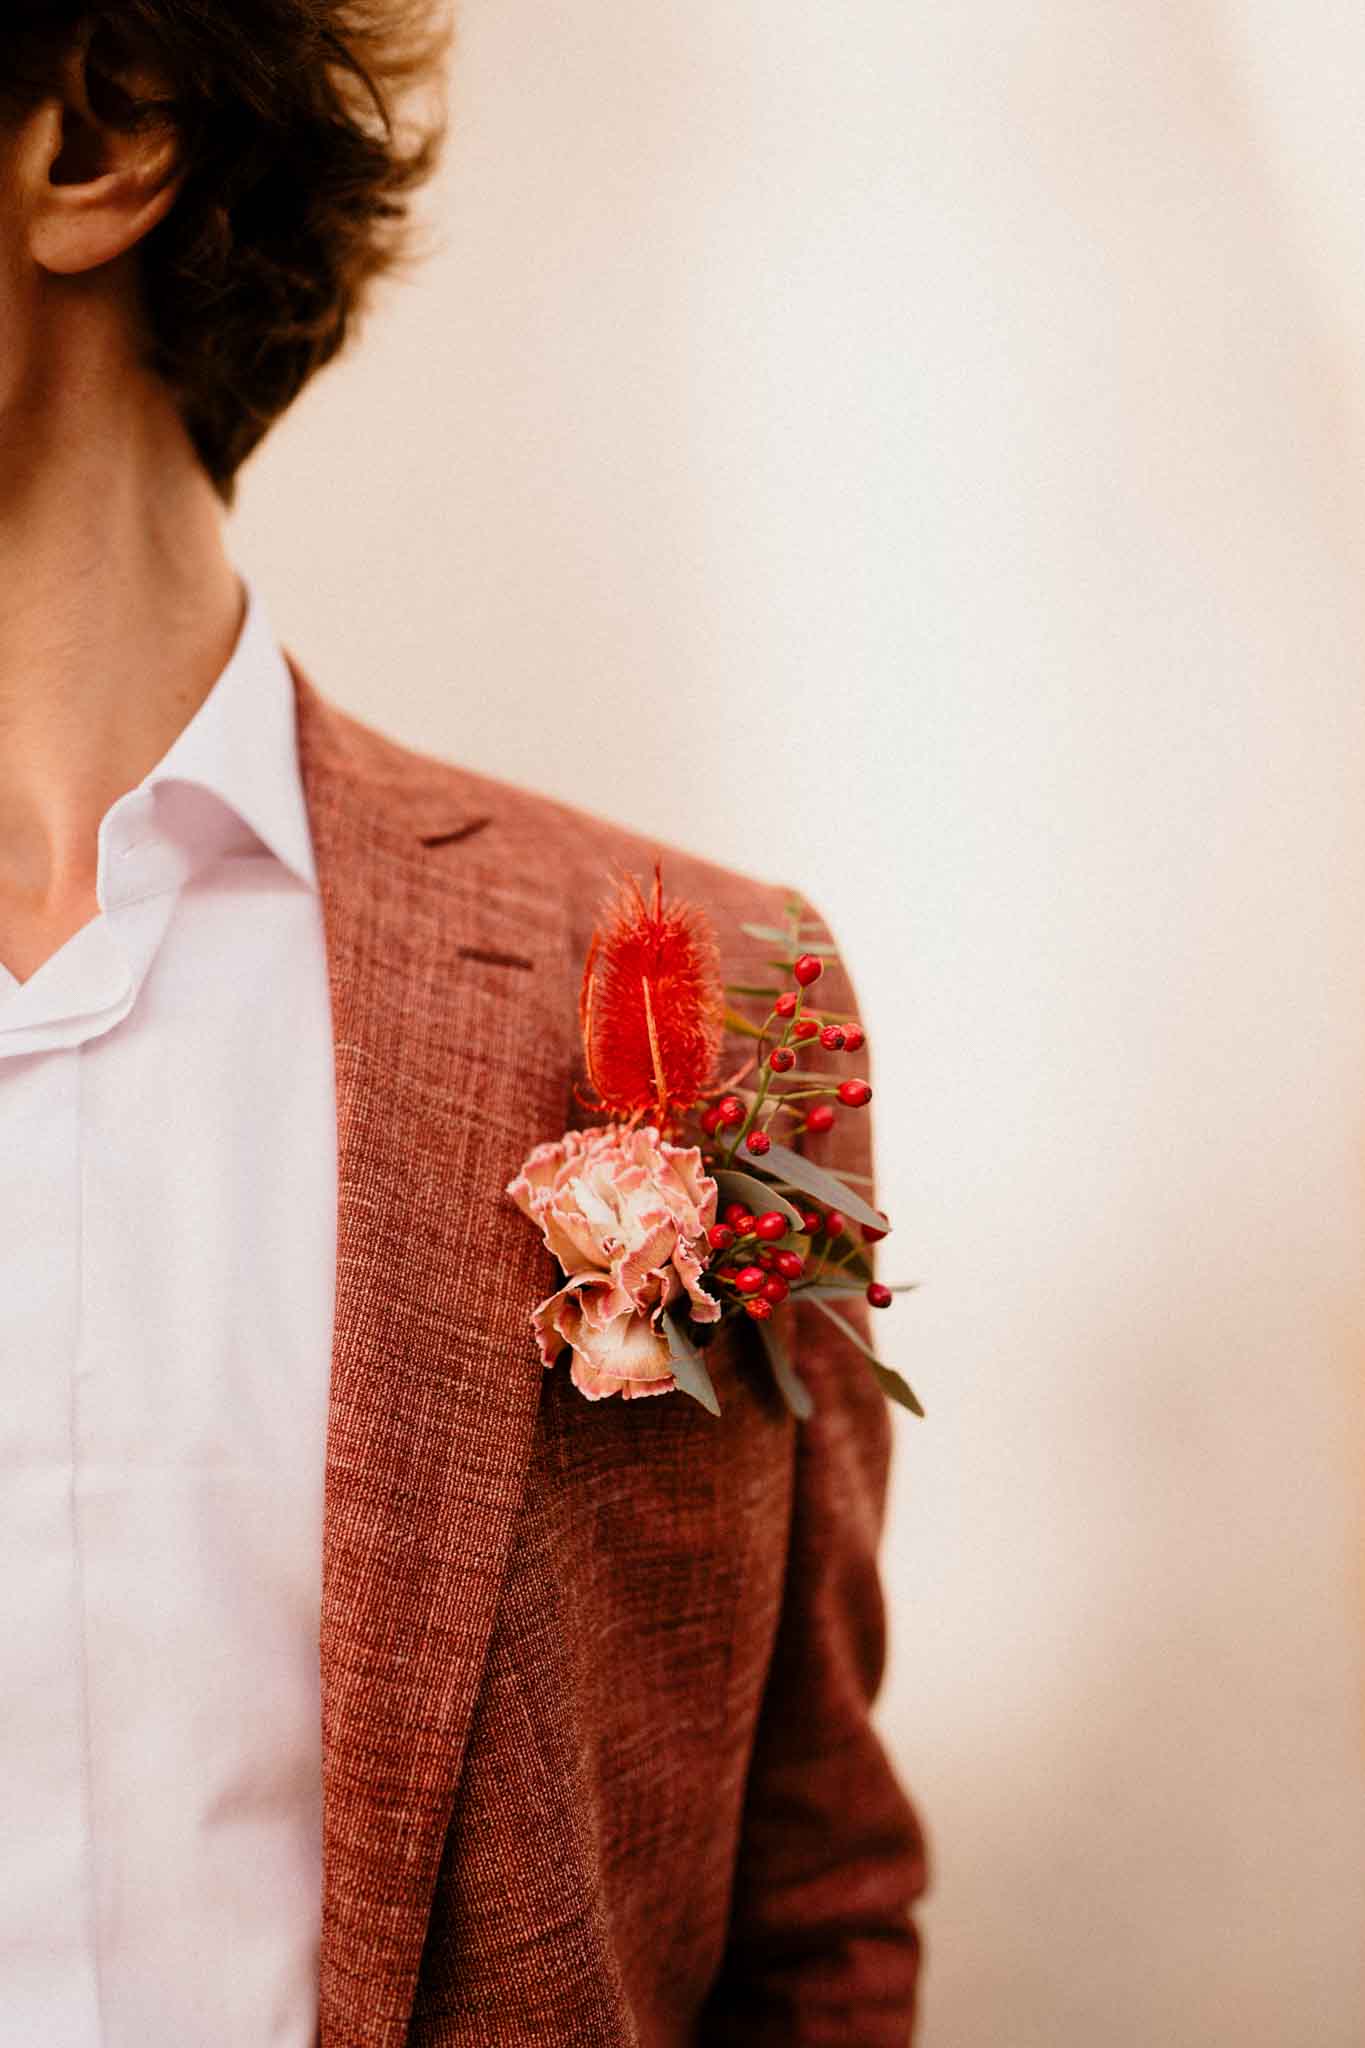 Boutonniere costume mariage rouge rose vert Credit blondiephotographie